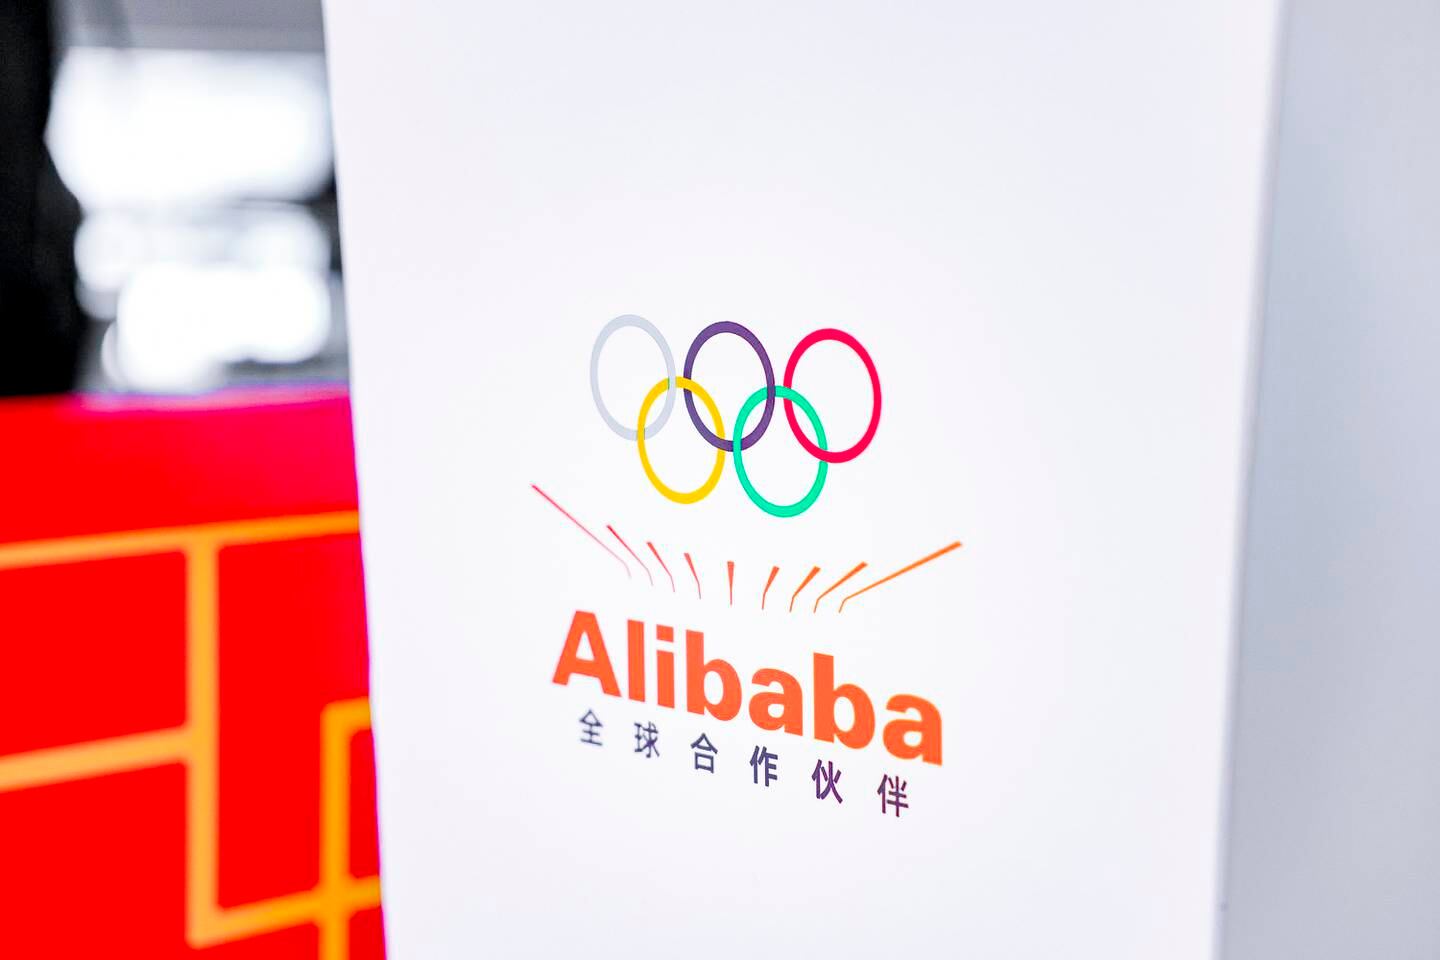 Alibaba Cloud technology was used during the Olympic Winter Games Beijing 2022 to increase broadcasting efficiency, while bolstering coverage of the event. Photo: Alibaba Cloud